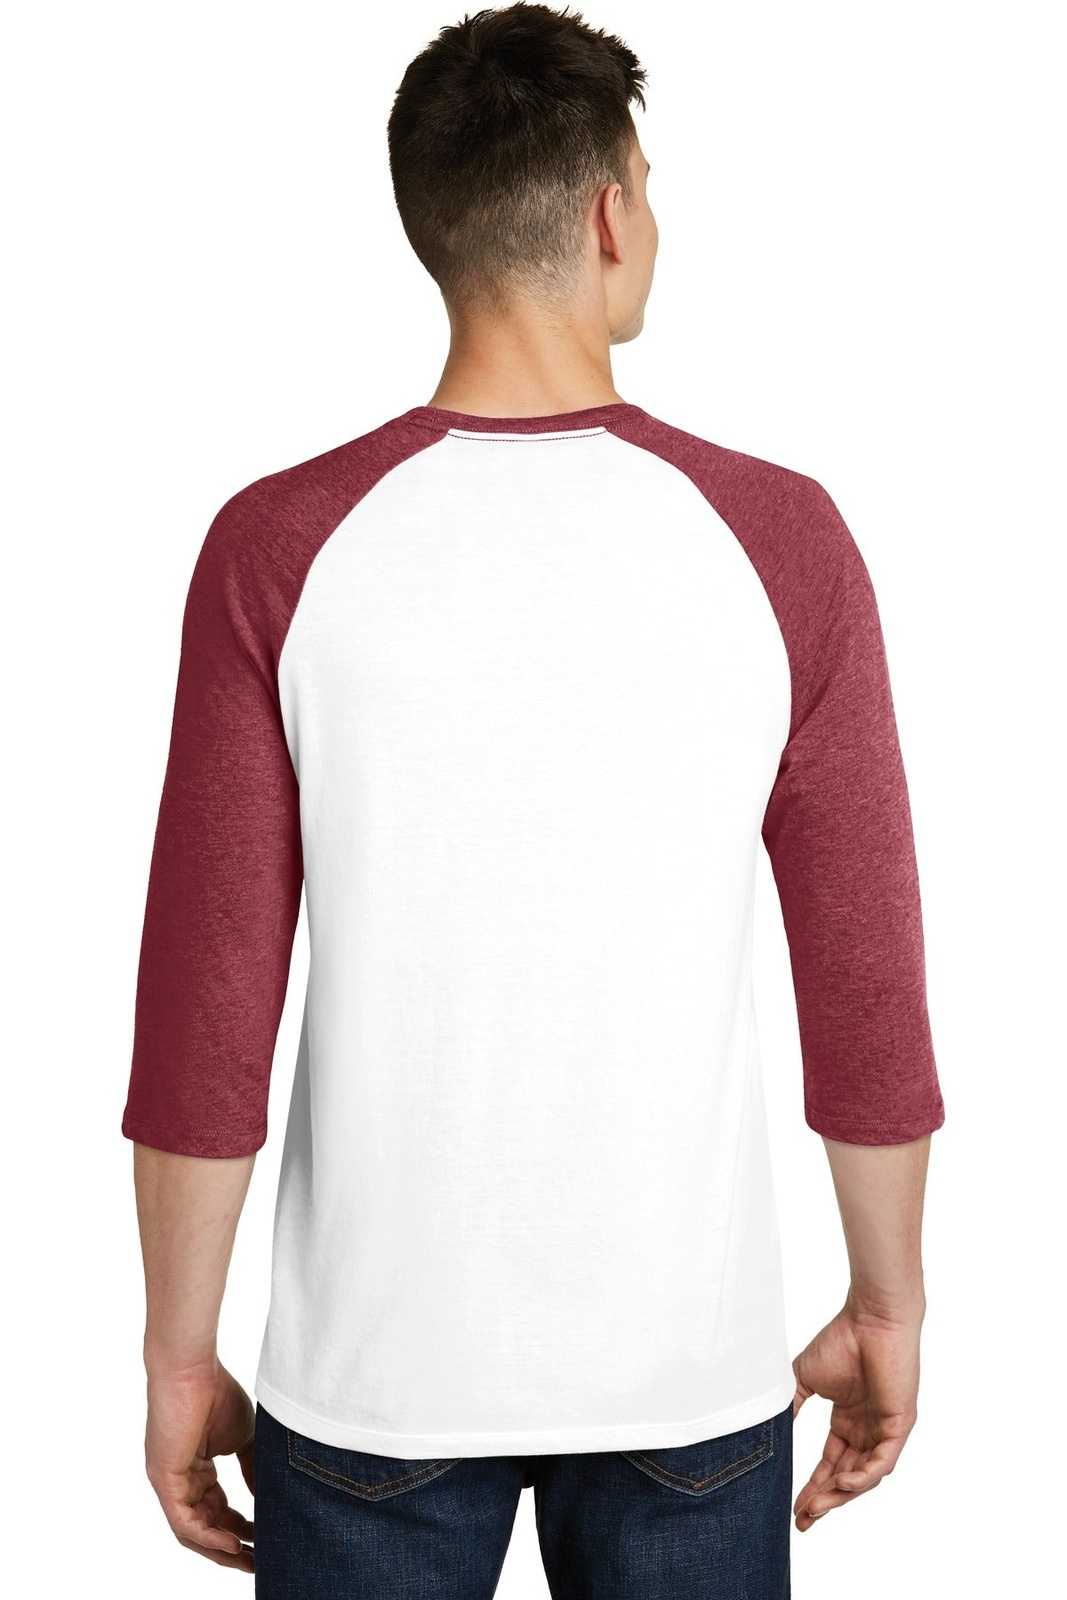 District DT6210 Very Important Tee 3/4-Sleeve Raglan - Heathered Red White - HIT a Double - 1